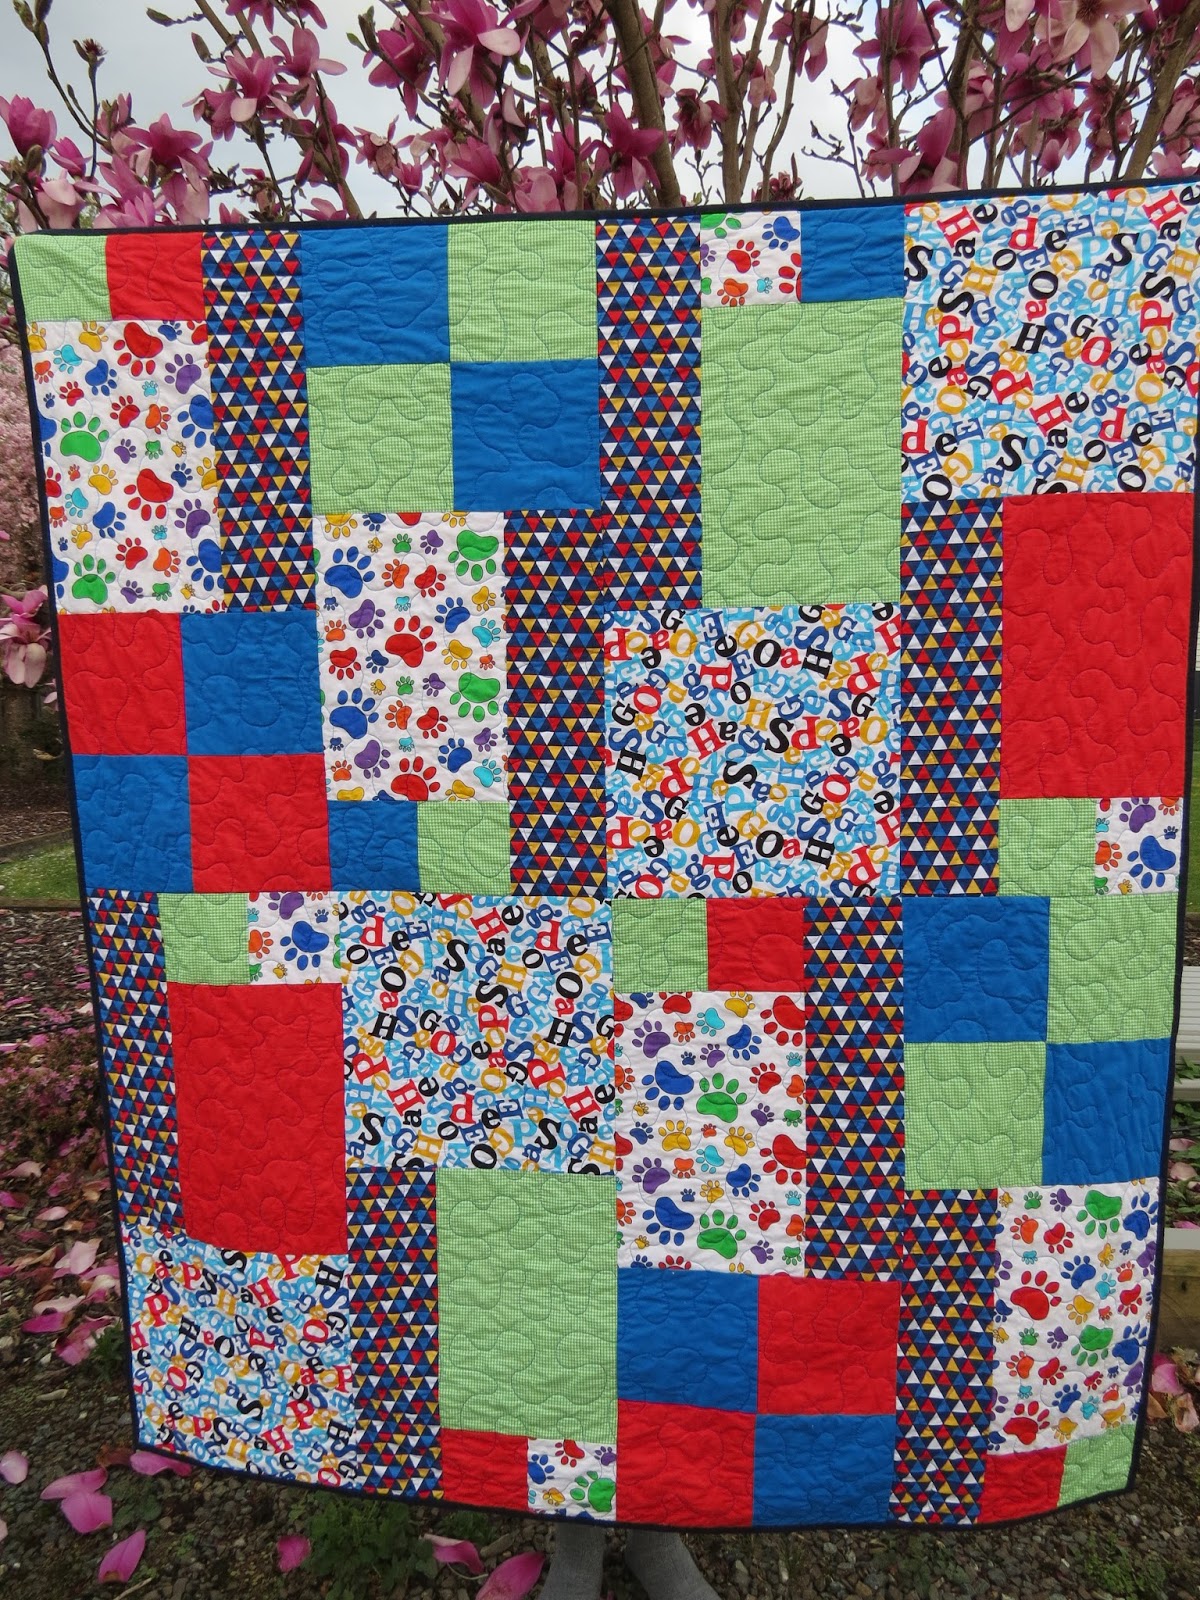 Jen's Crafts and Quilts Scrapbook: QUILTS